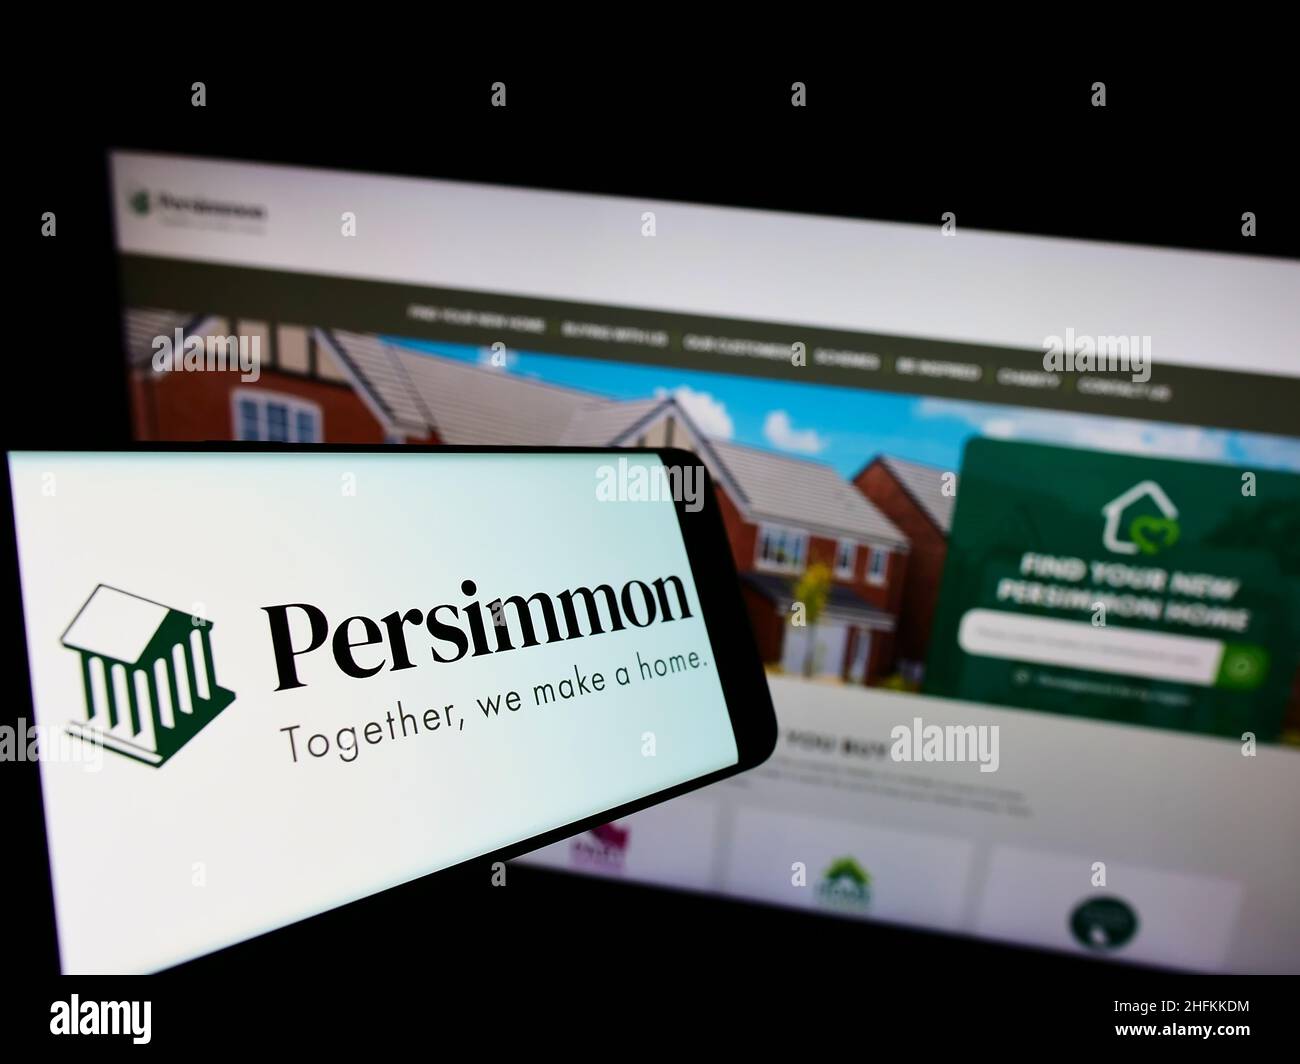 Cellphone with logo of British housebuilding company Persimmon plc on screen in front of business website. Focus on center of phone display. Stock Photo